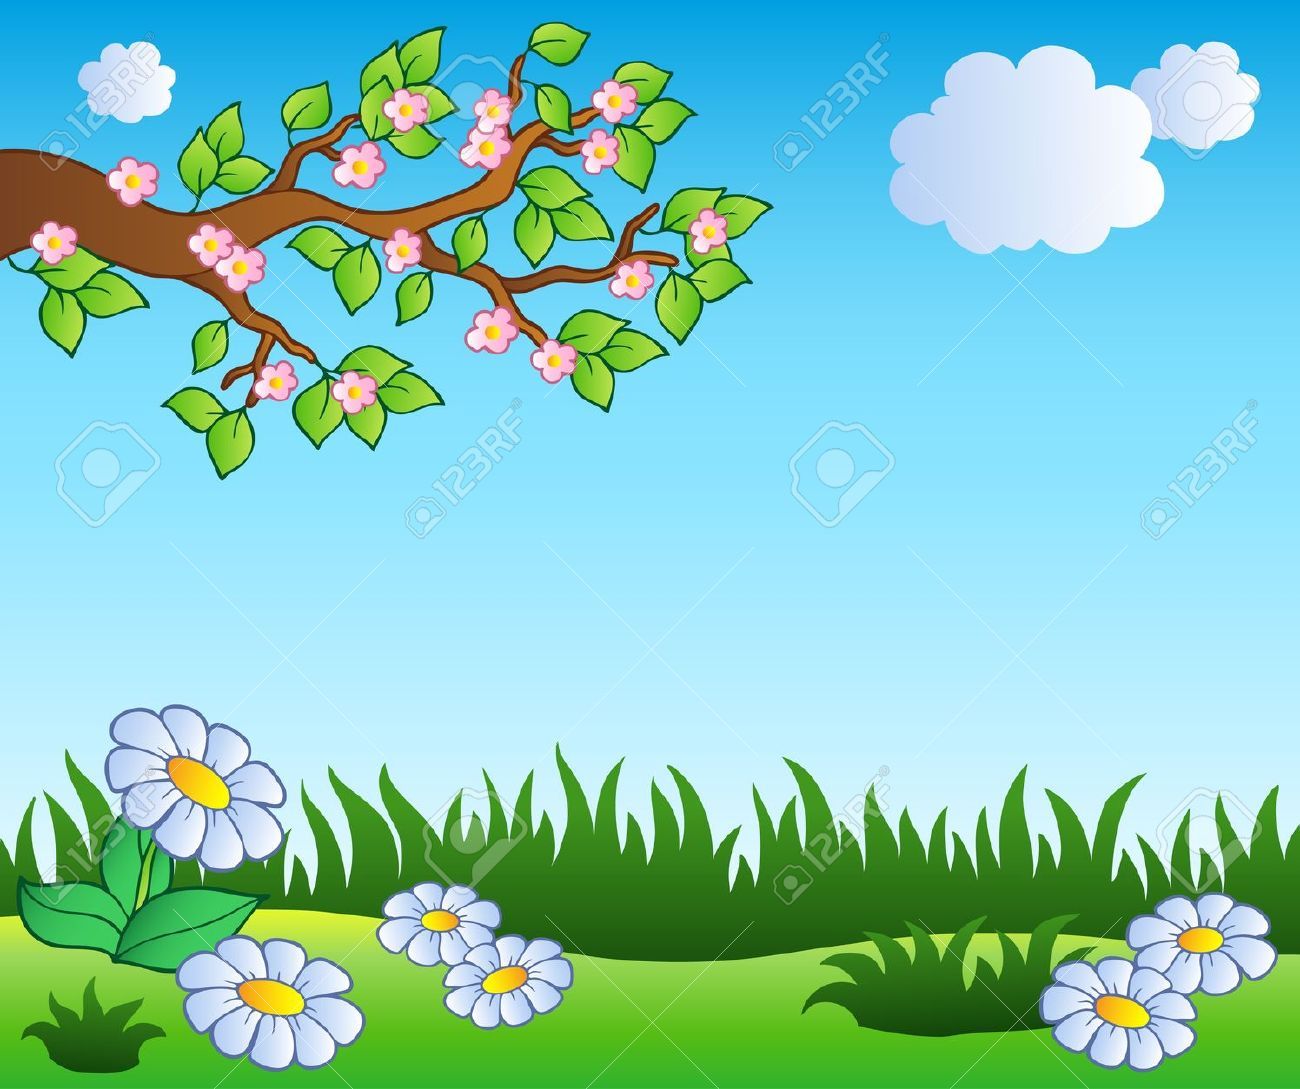 Spring meadow with daisies illustration. Scenery drawing for kids, Illustration, Drawing for kids